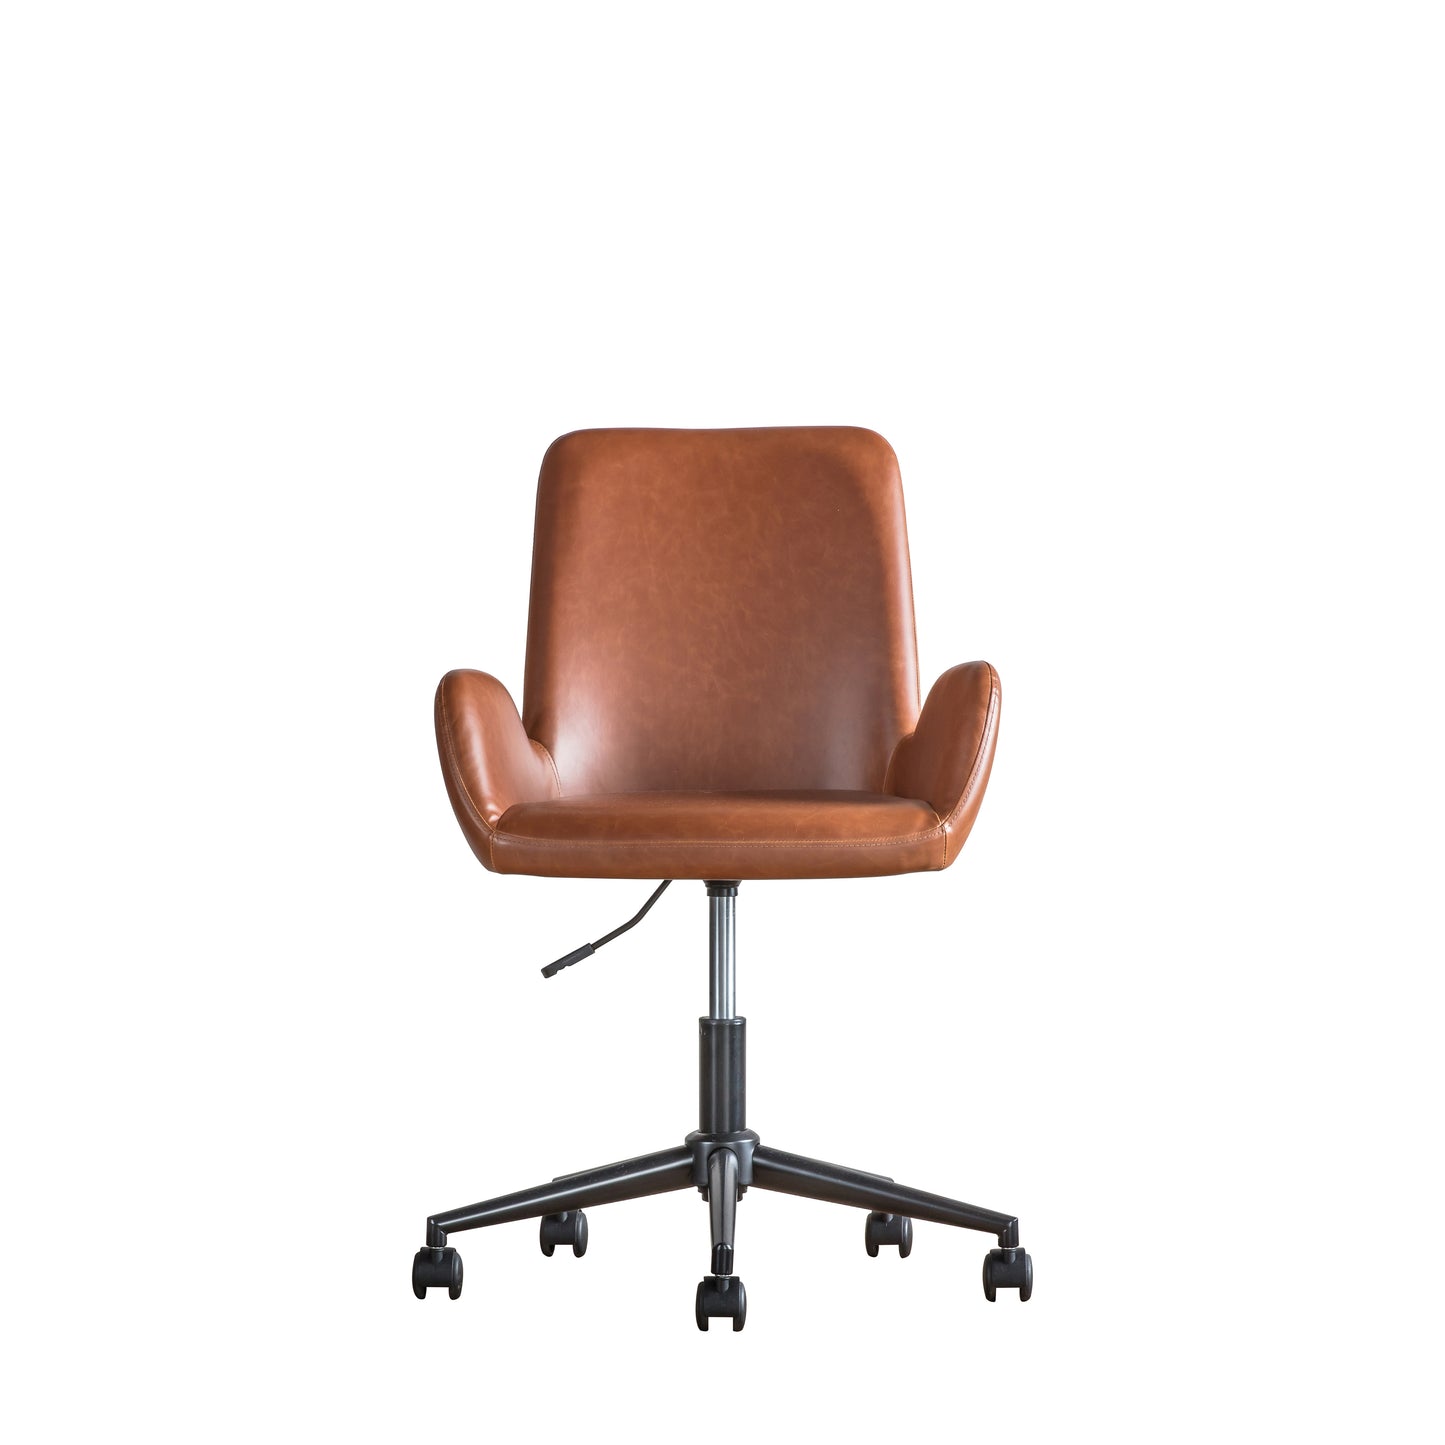 A Noss Swivel Chair Brown in interior decor from Kikiathome.co.uk on a white background.